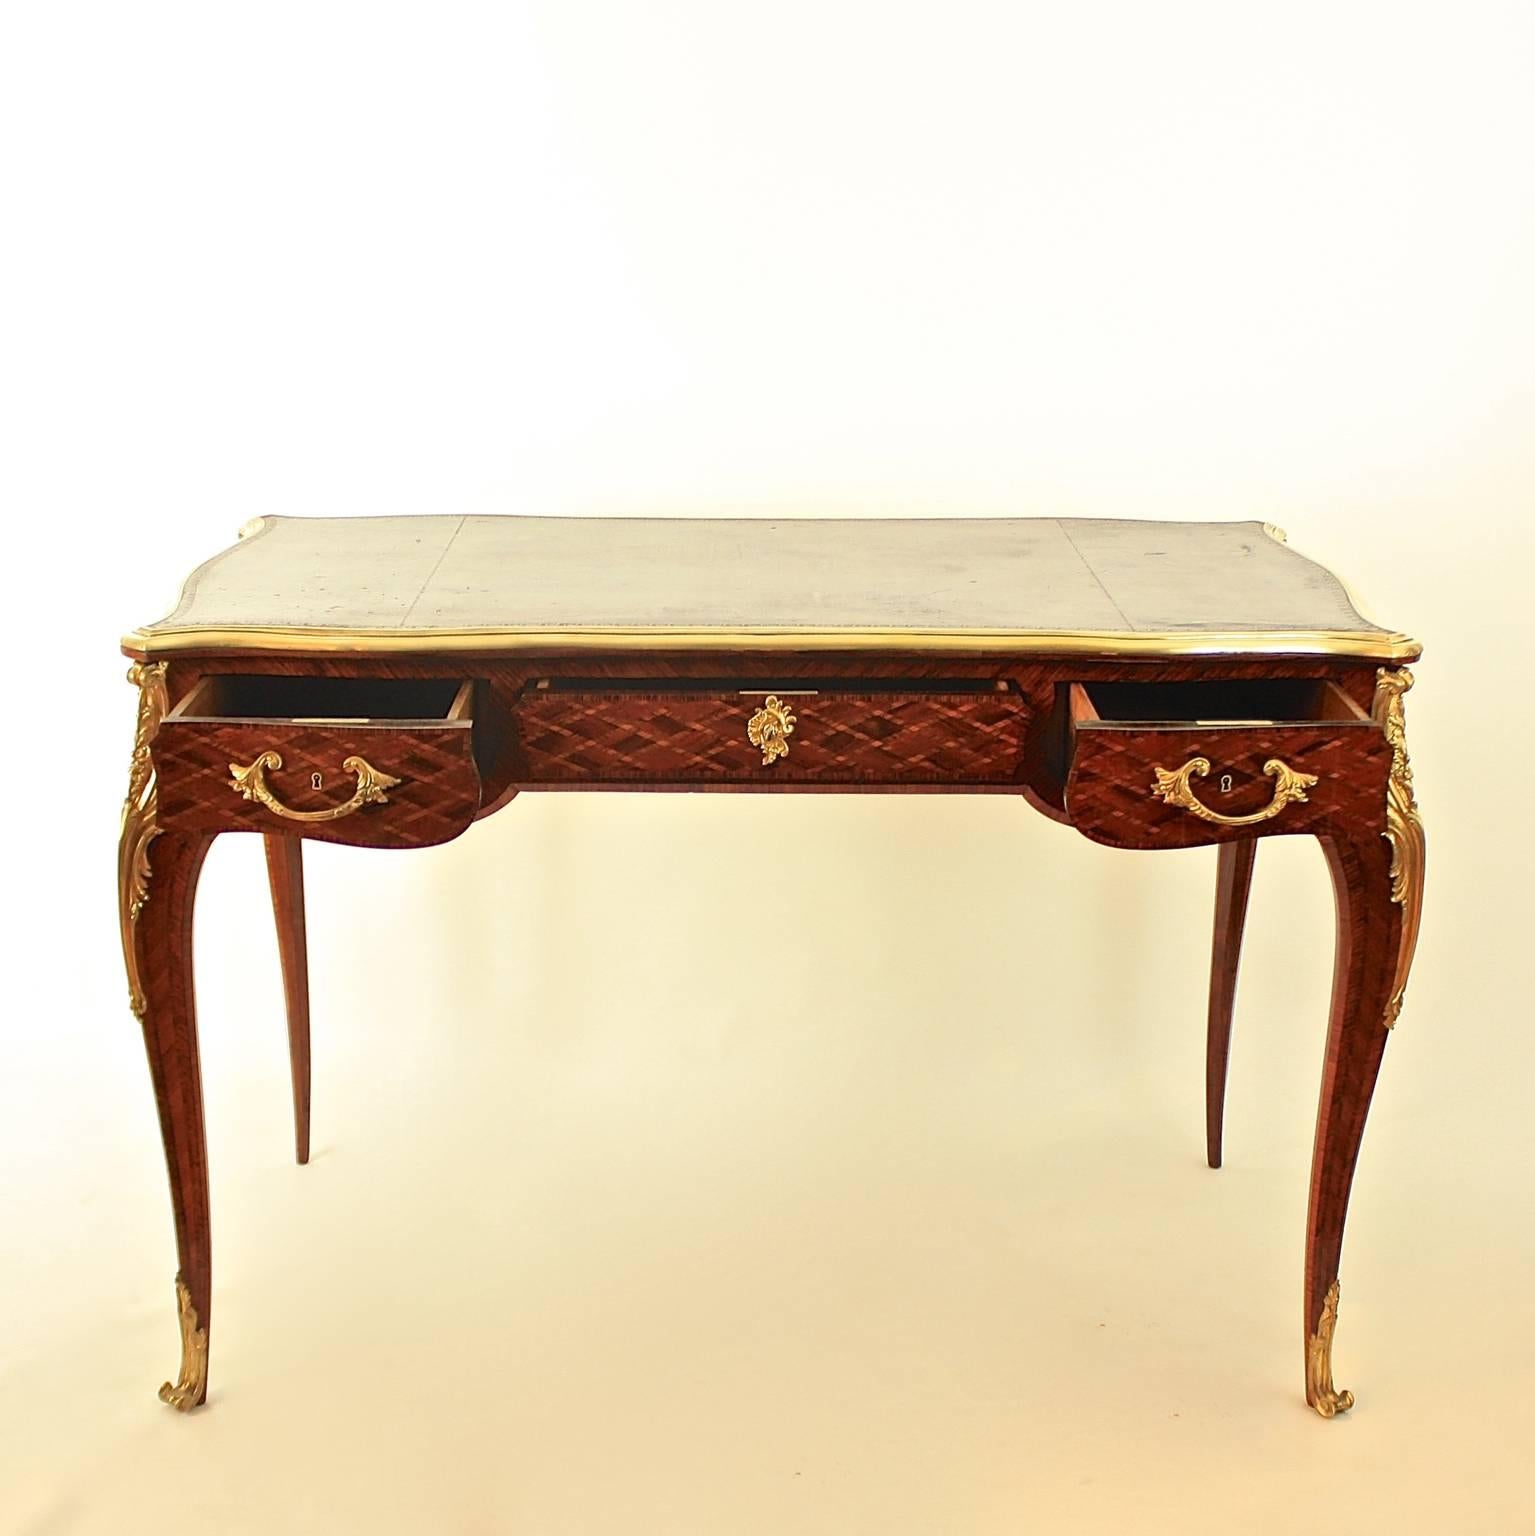 French Small Louis XV Style Gilt Bronze Mounted Marquetry Bureau Plat or Desk